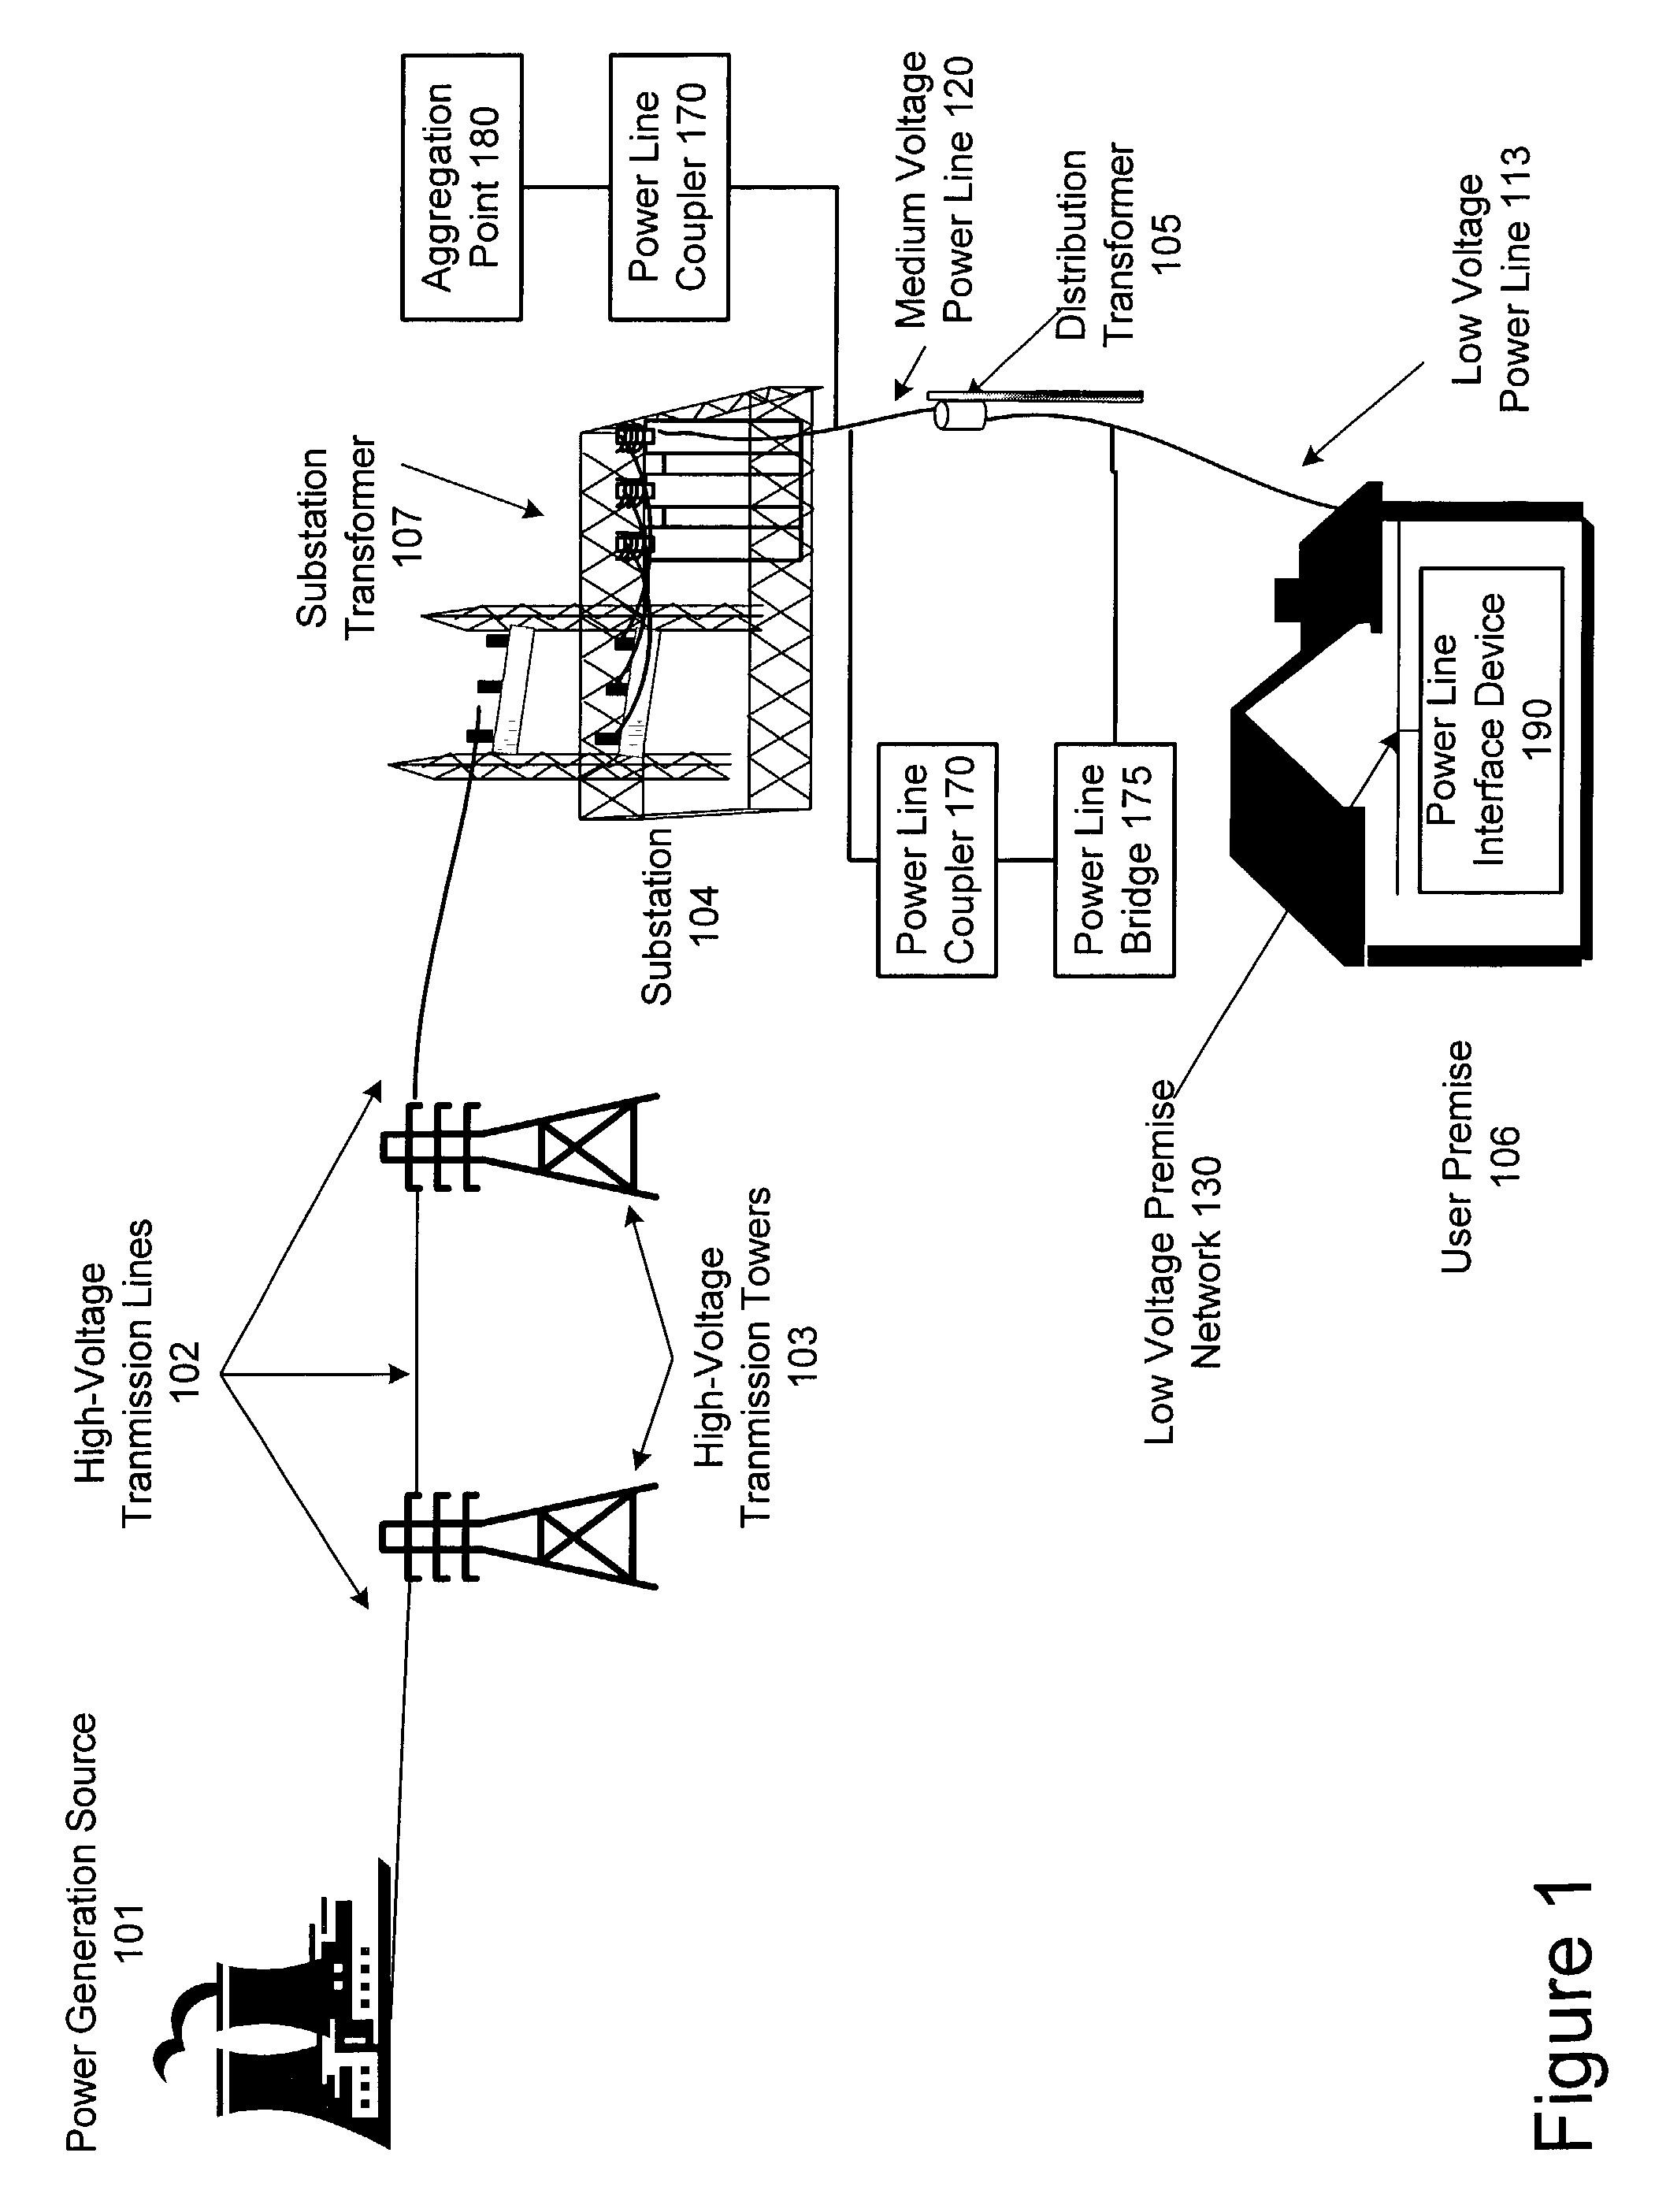 Device and method for providing power line characteristics and diagnostics